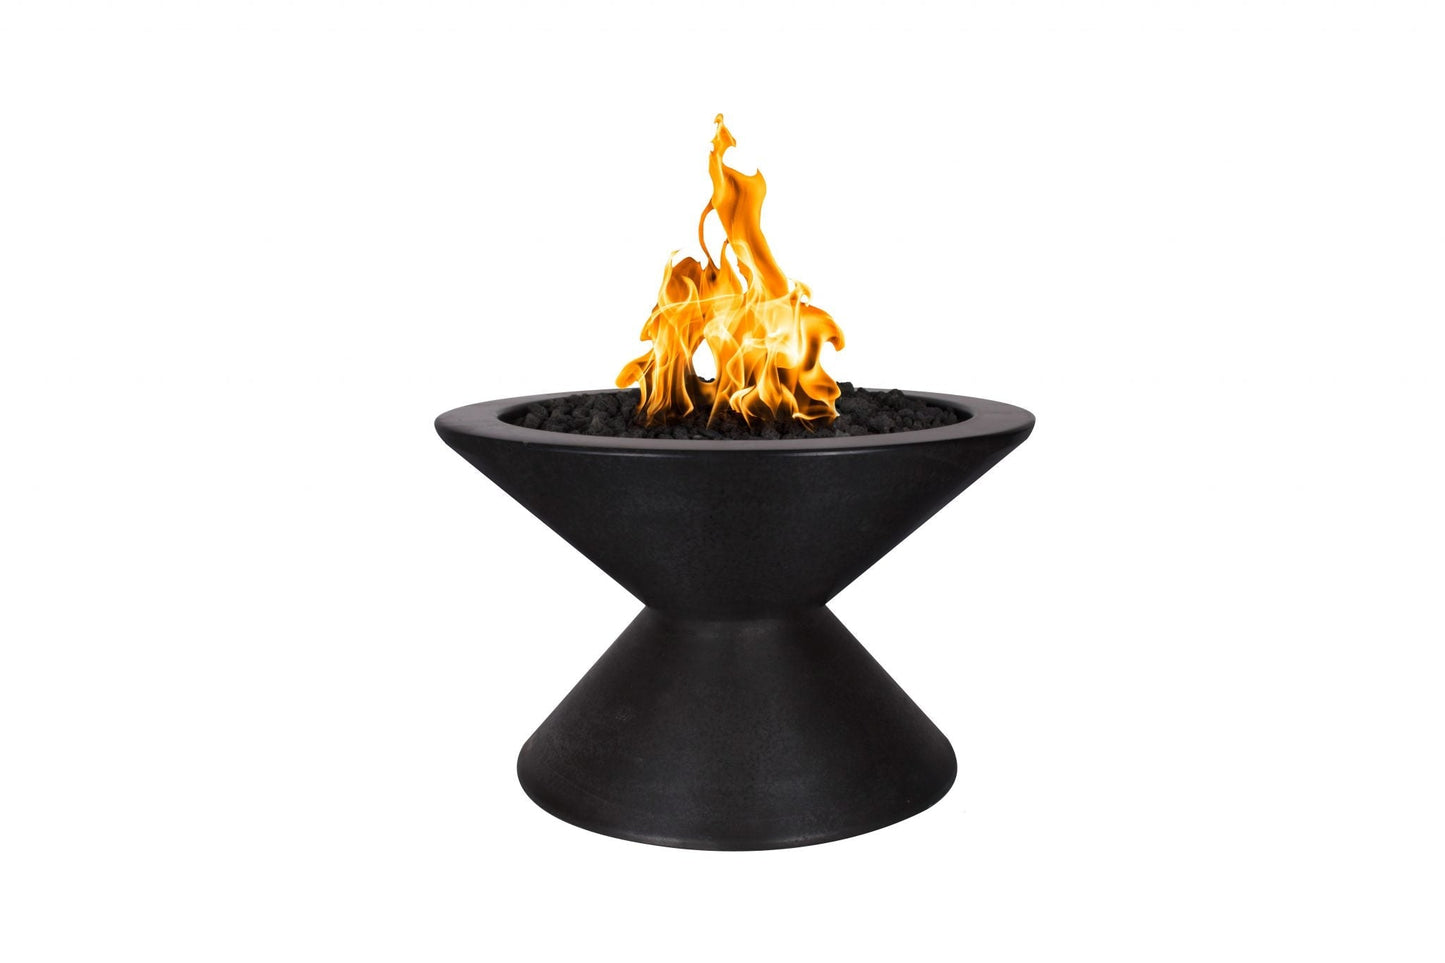 The Outdoor Plus Round Lucia 31" Rustic White GFRC Concrete Liquid Propane Fire Pit with 110V Electronic Ignition